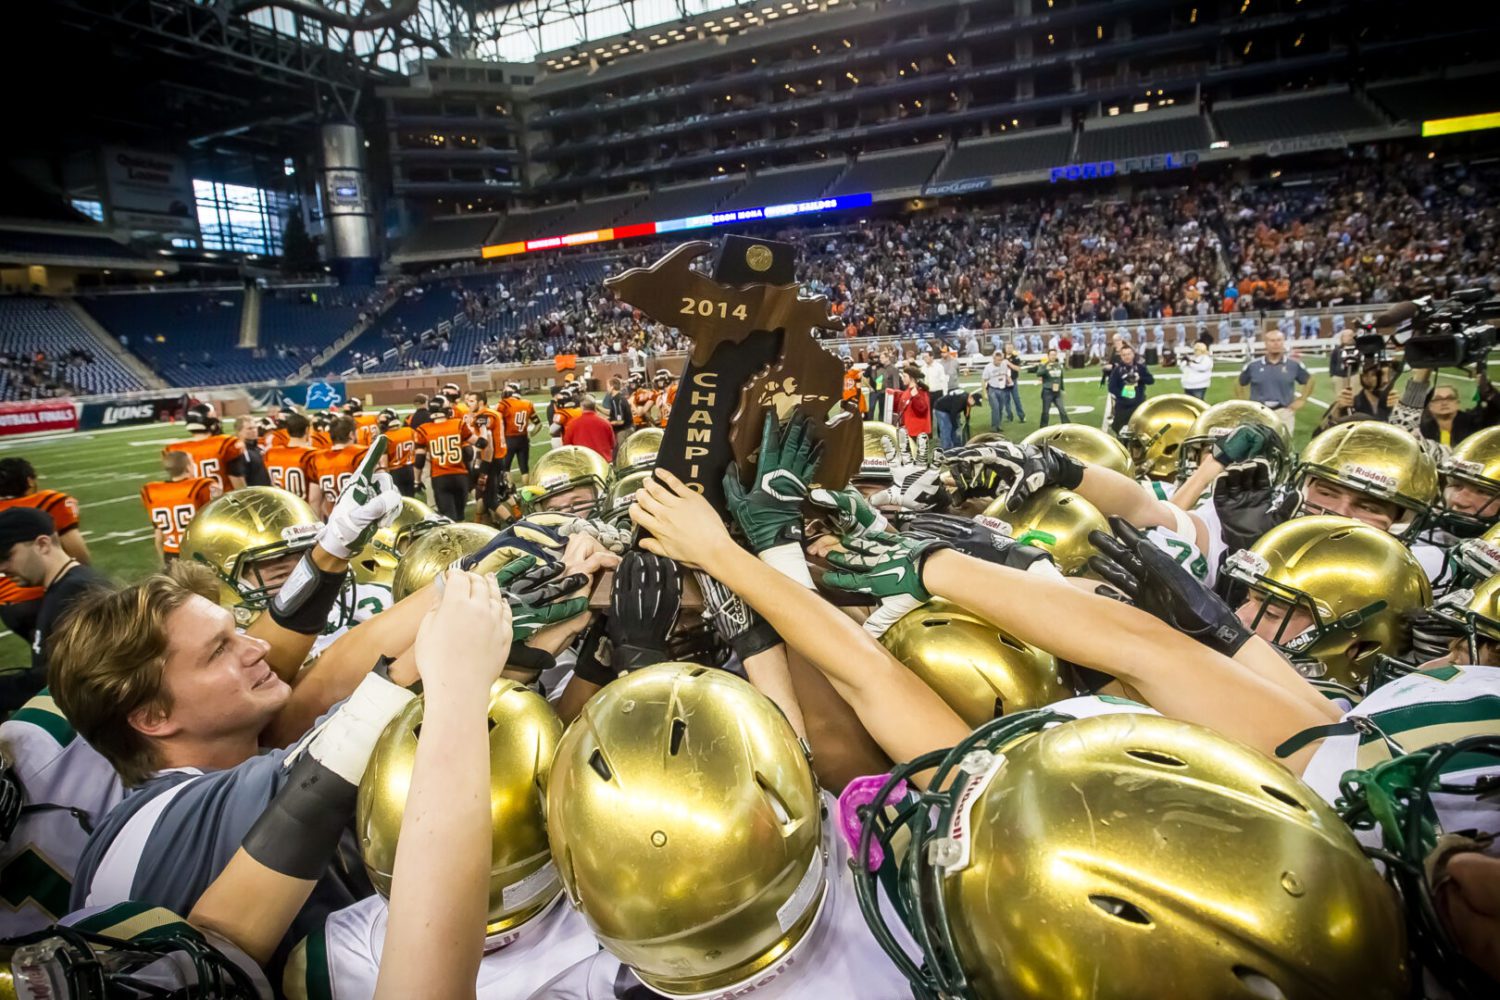 Video highlights from Muskegon Catholic’s state championship win over Munising